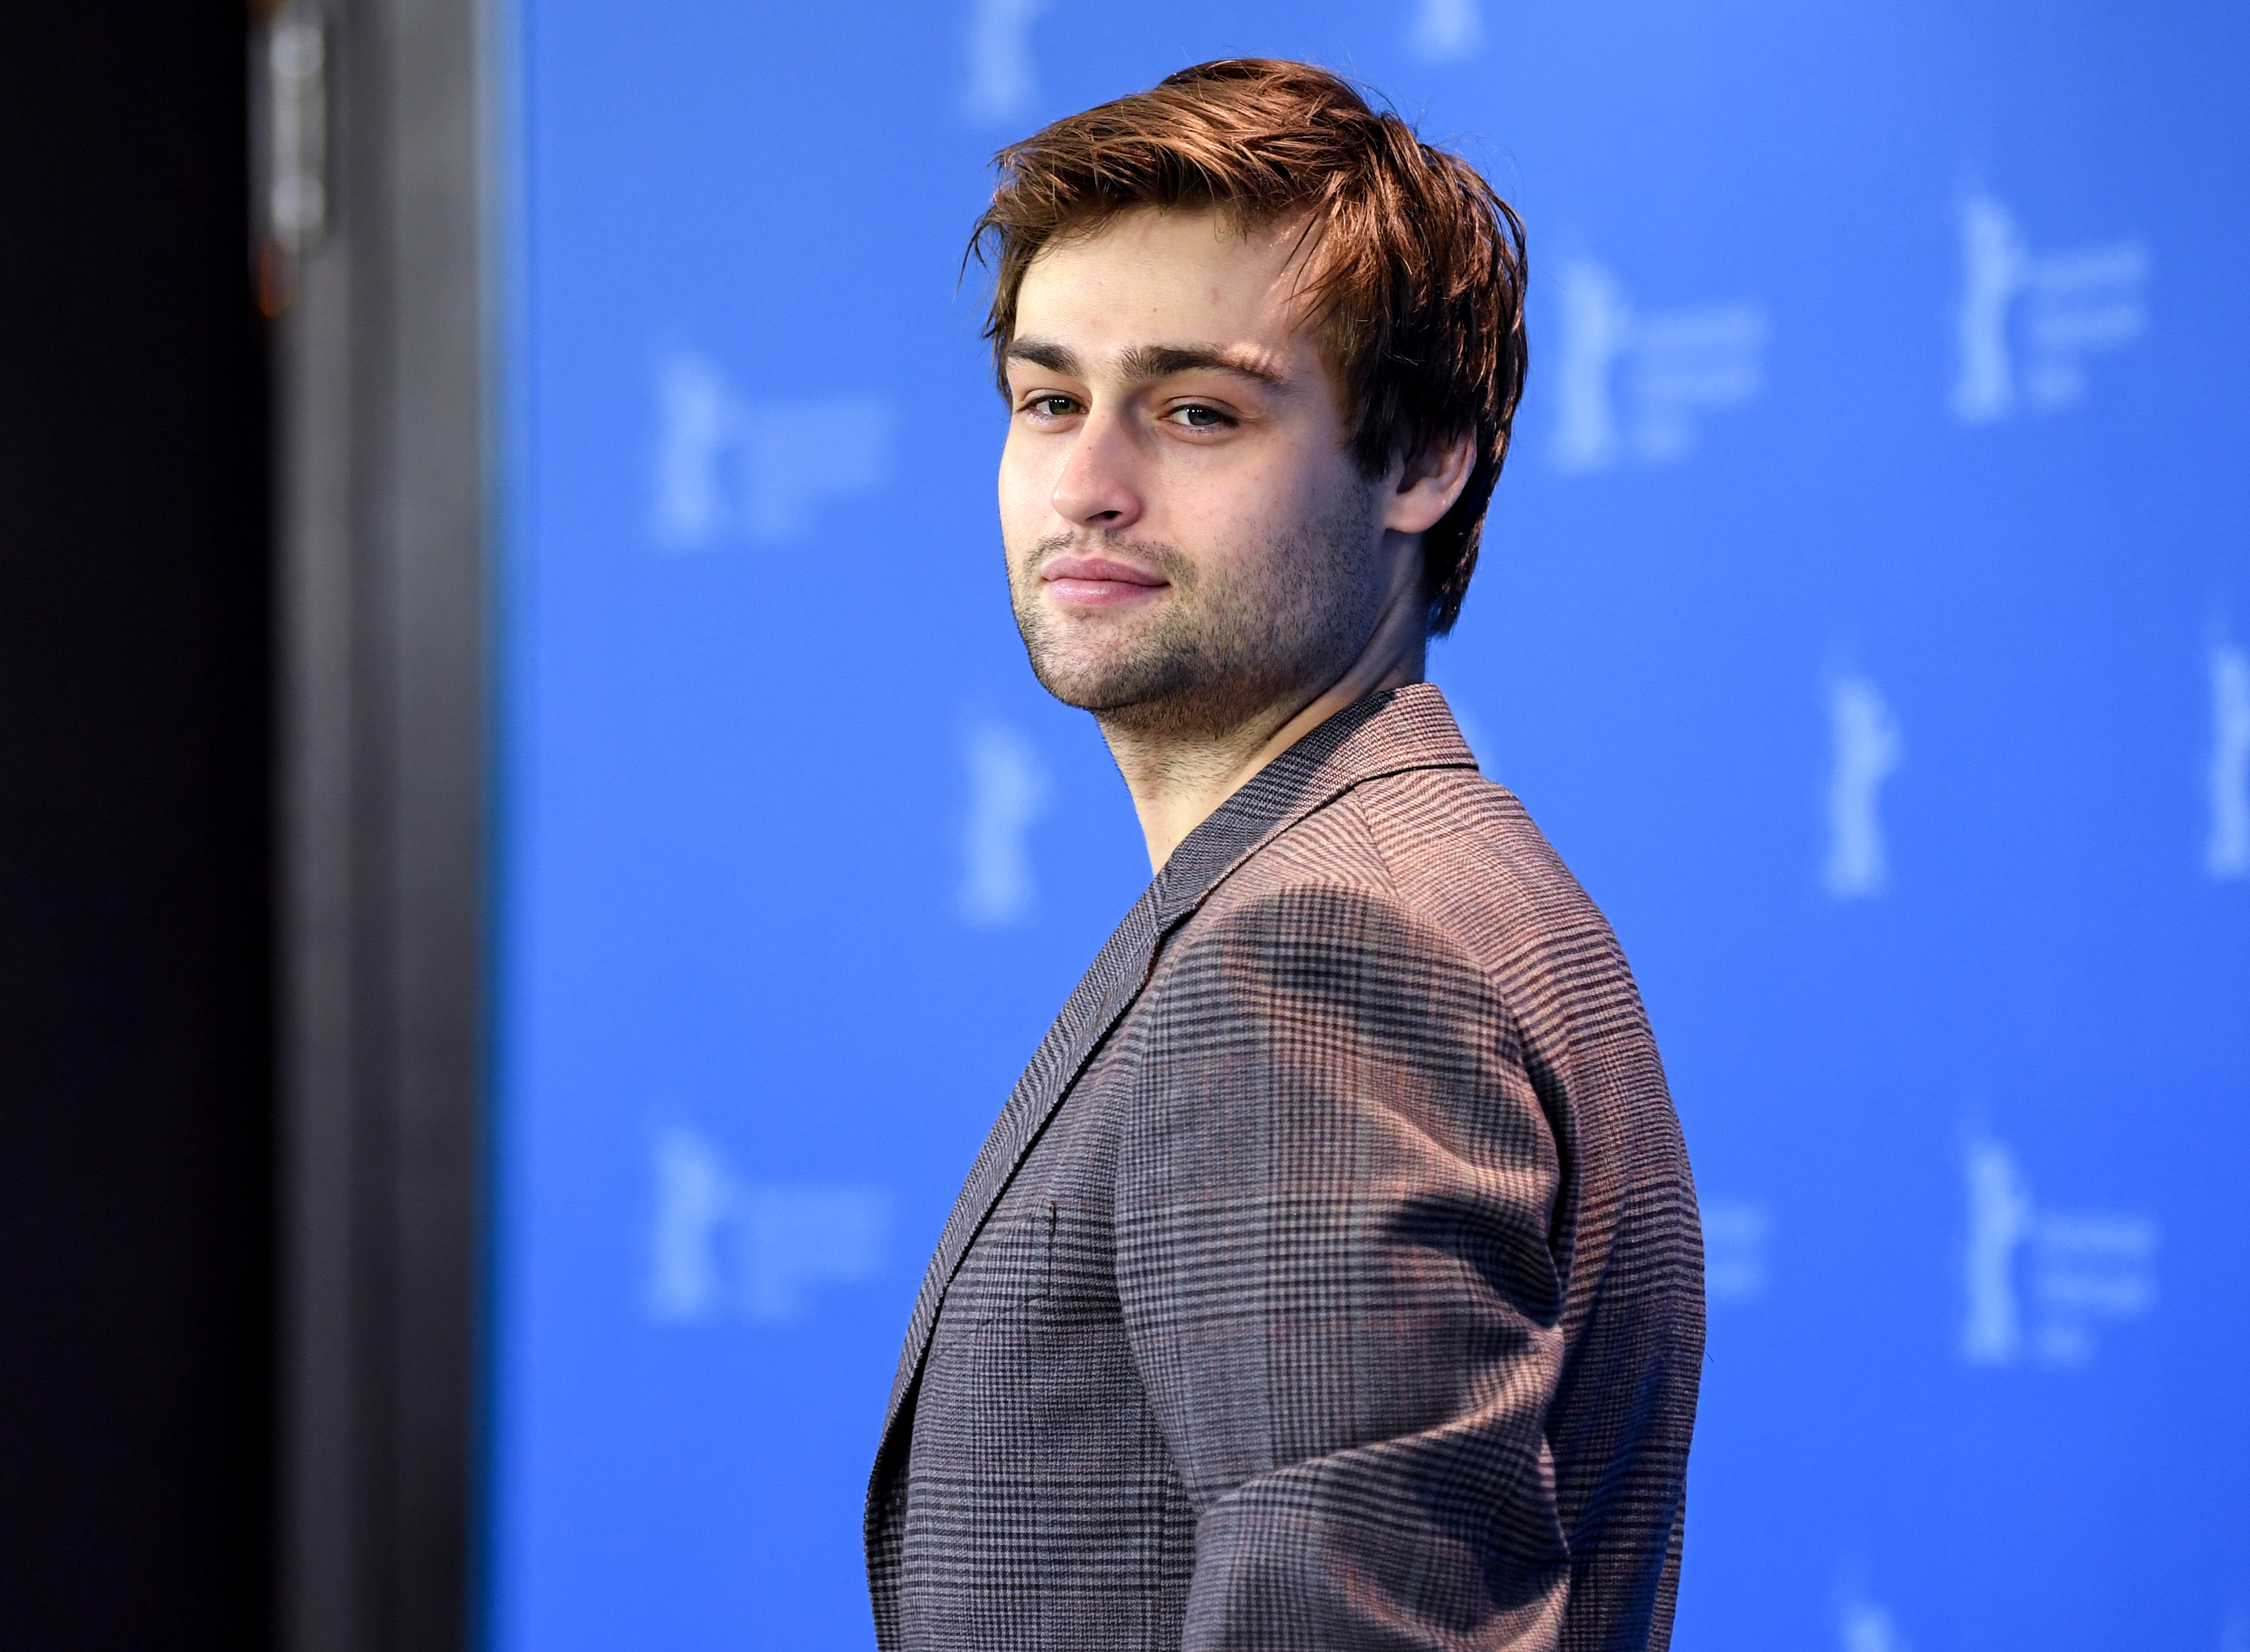 Douglas Booth at the photocall for film "My Salinger Year" on February 20, 2020. | Source: Getty Images